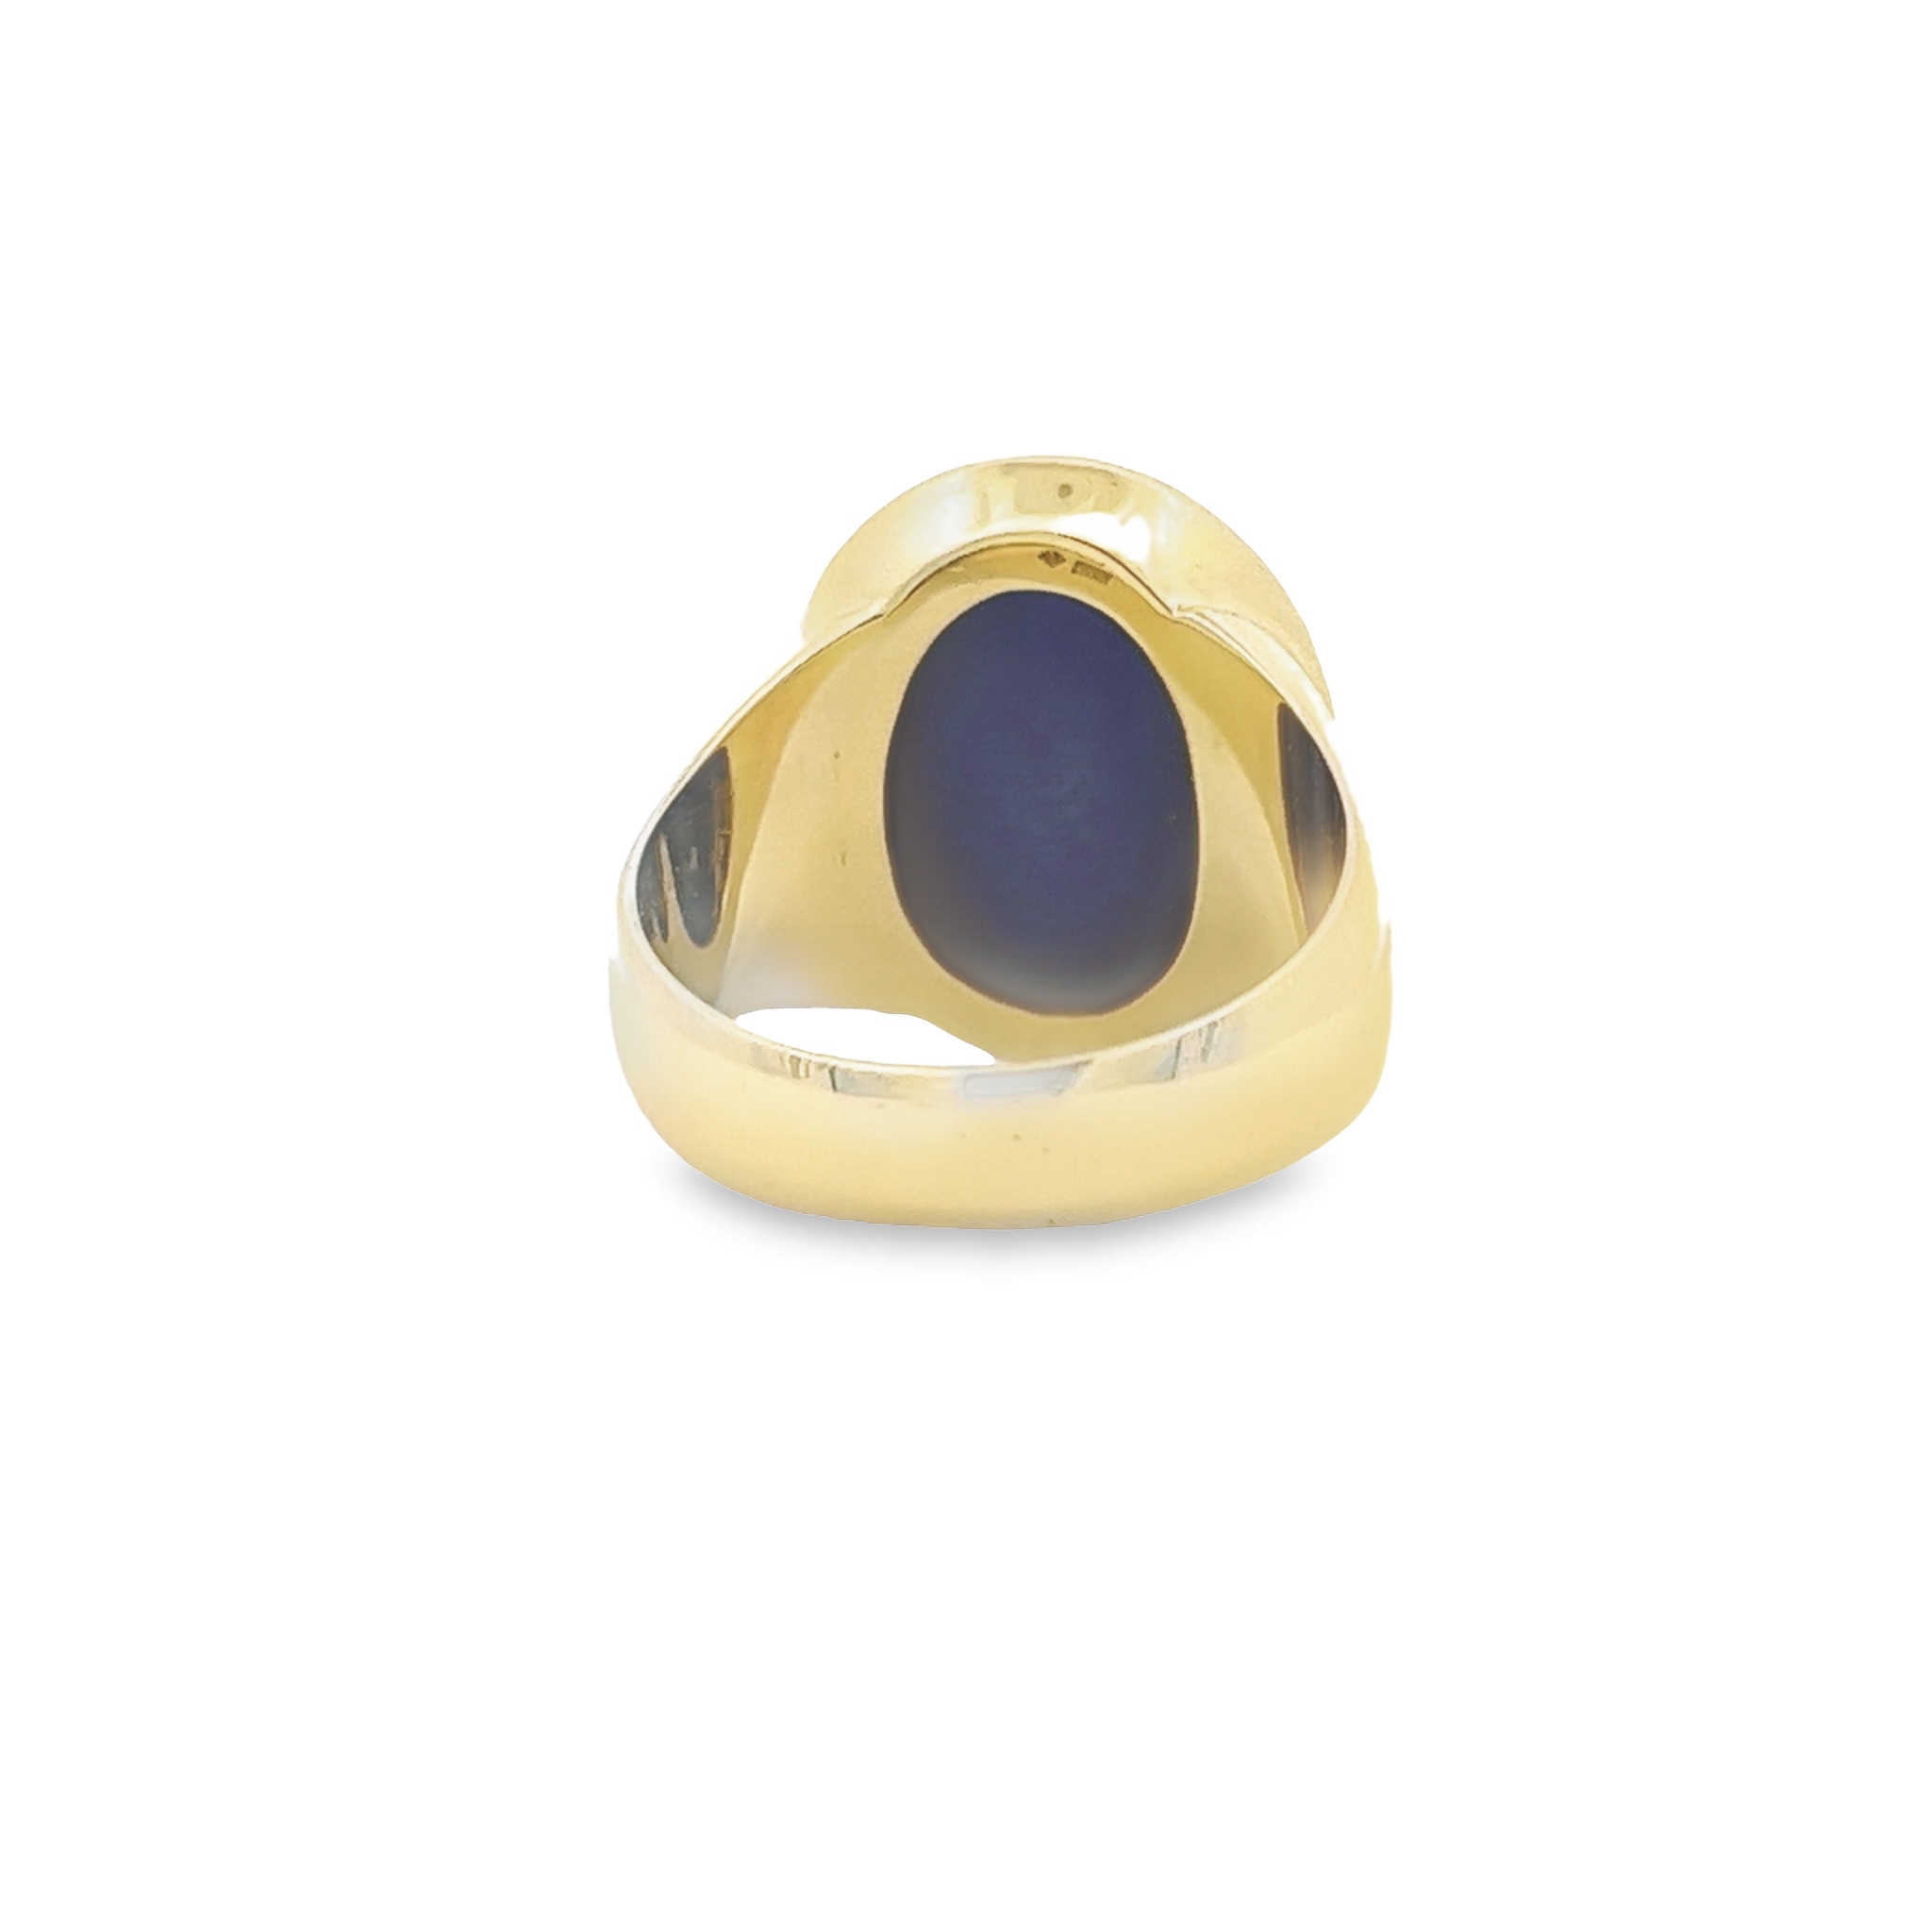 12gm 14ct Gold Gents Signet Ring with Oval Lapis Lazuli – Pre-Owned